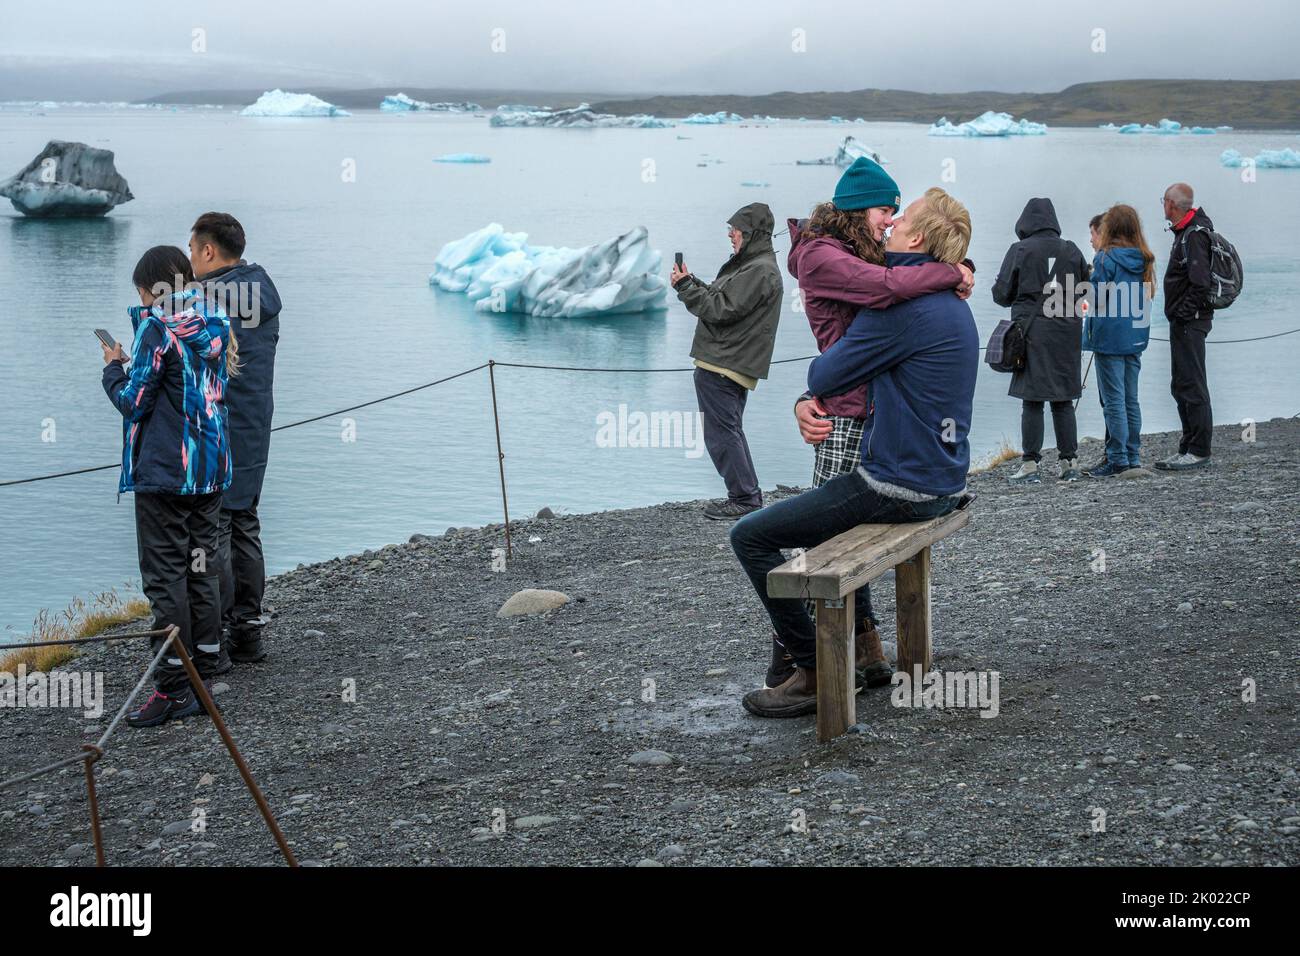 A couple kissing while other tourists take photographs of the icebergs at the Jokulsarlon glacial lagoon, Iceland Stock Photo